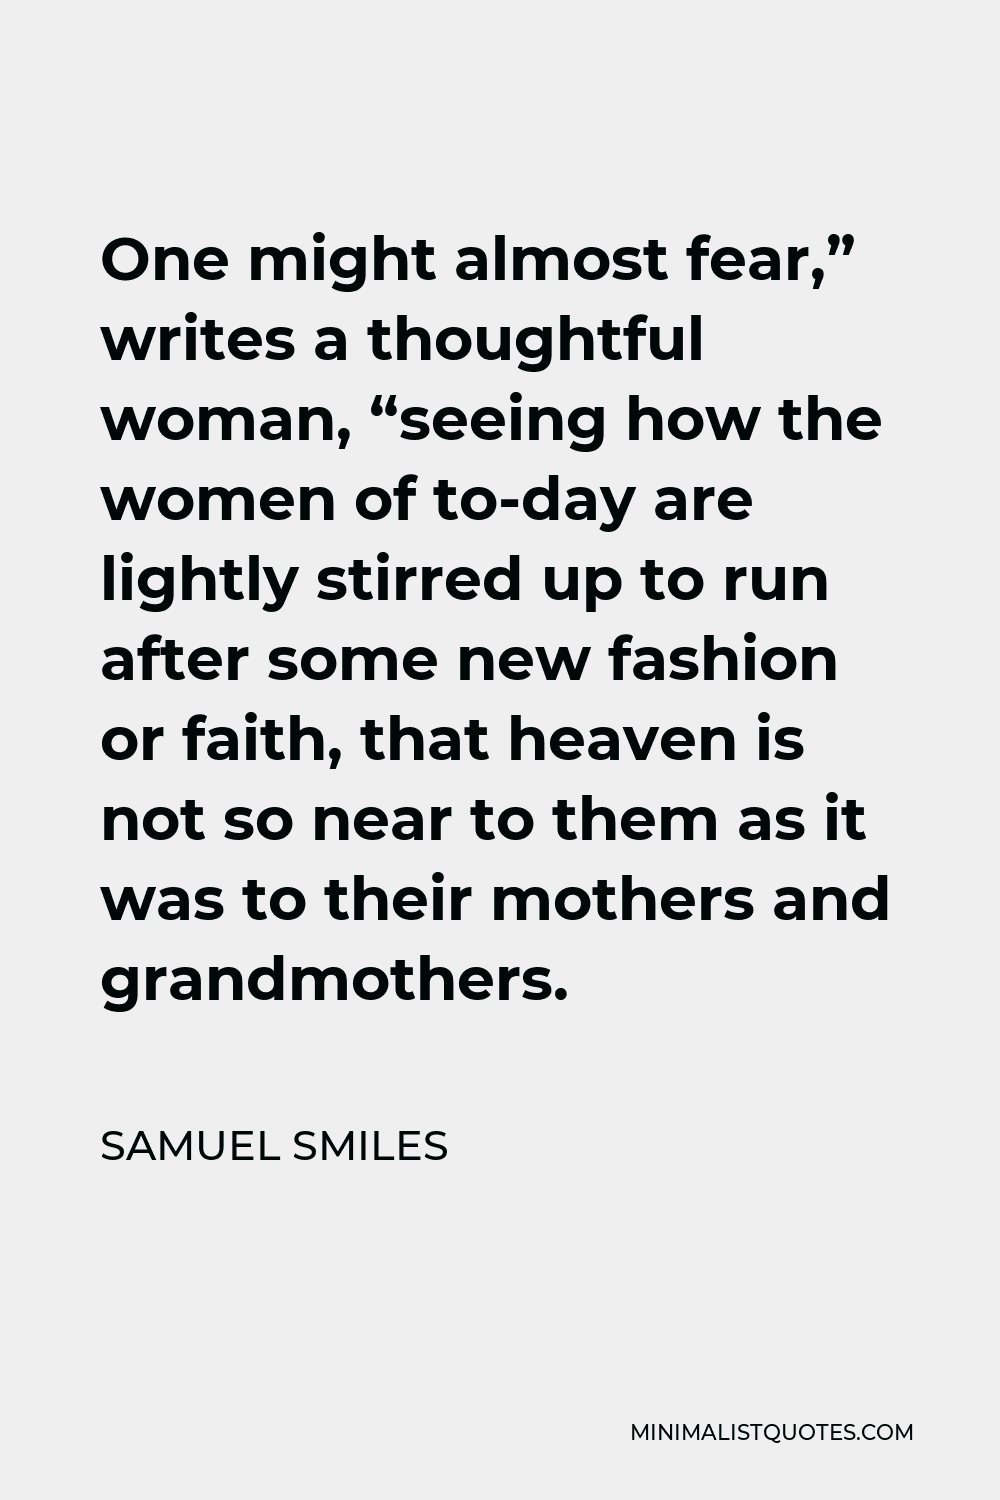 Samuel Smiles Quote - One might almost fear,” writes a thoughtful woman, “seeing how the women of to-day are lightly stirred up to run after some new fashion or faith, that heaven is not so near to them as it was to their mothers and grandmothers.